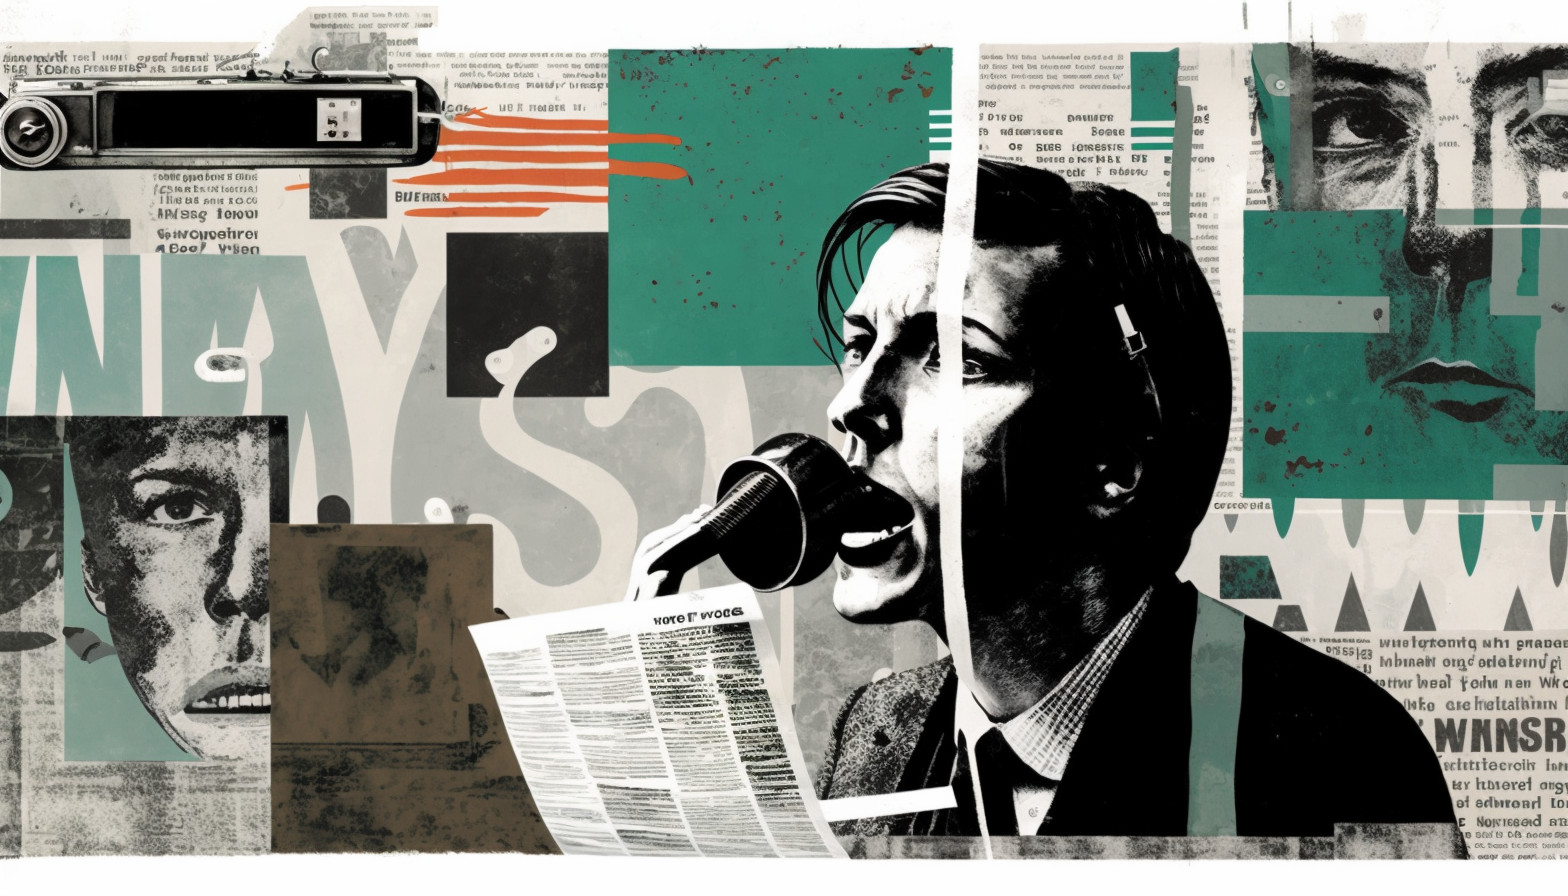 A collage-style illustration of a person in a suit speaking into a microphone, with images of newspapers and other text surrounding them, created by the AI tool Midjourney. 